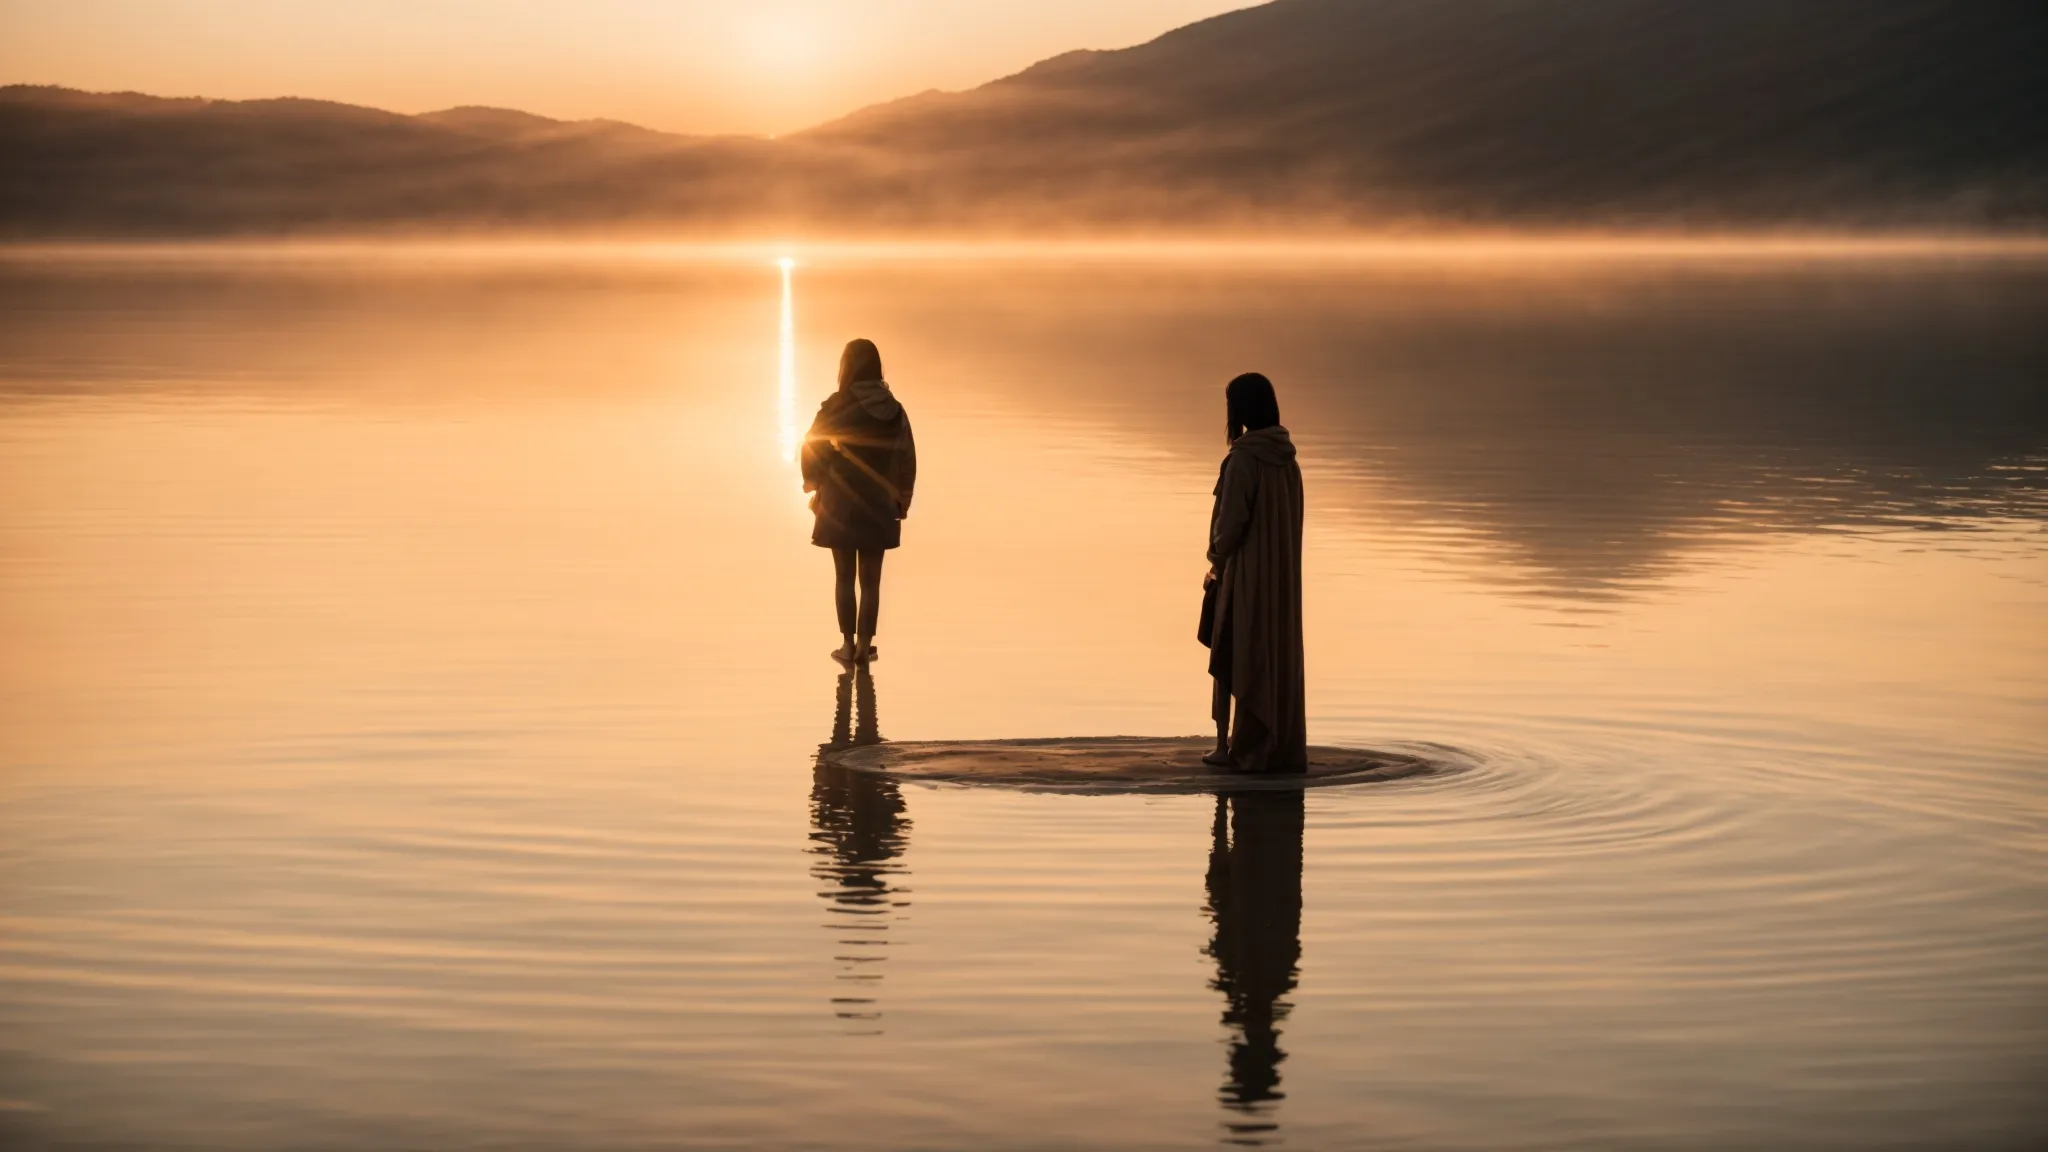 a sole figure stands at the edge of a vast, shimmering lake at sunrise, a metaphor for the journey of crafting a unique personal brand story.